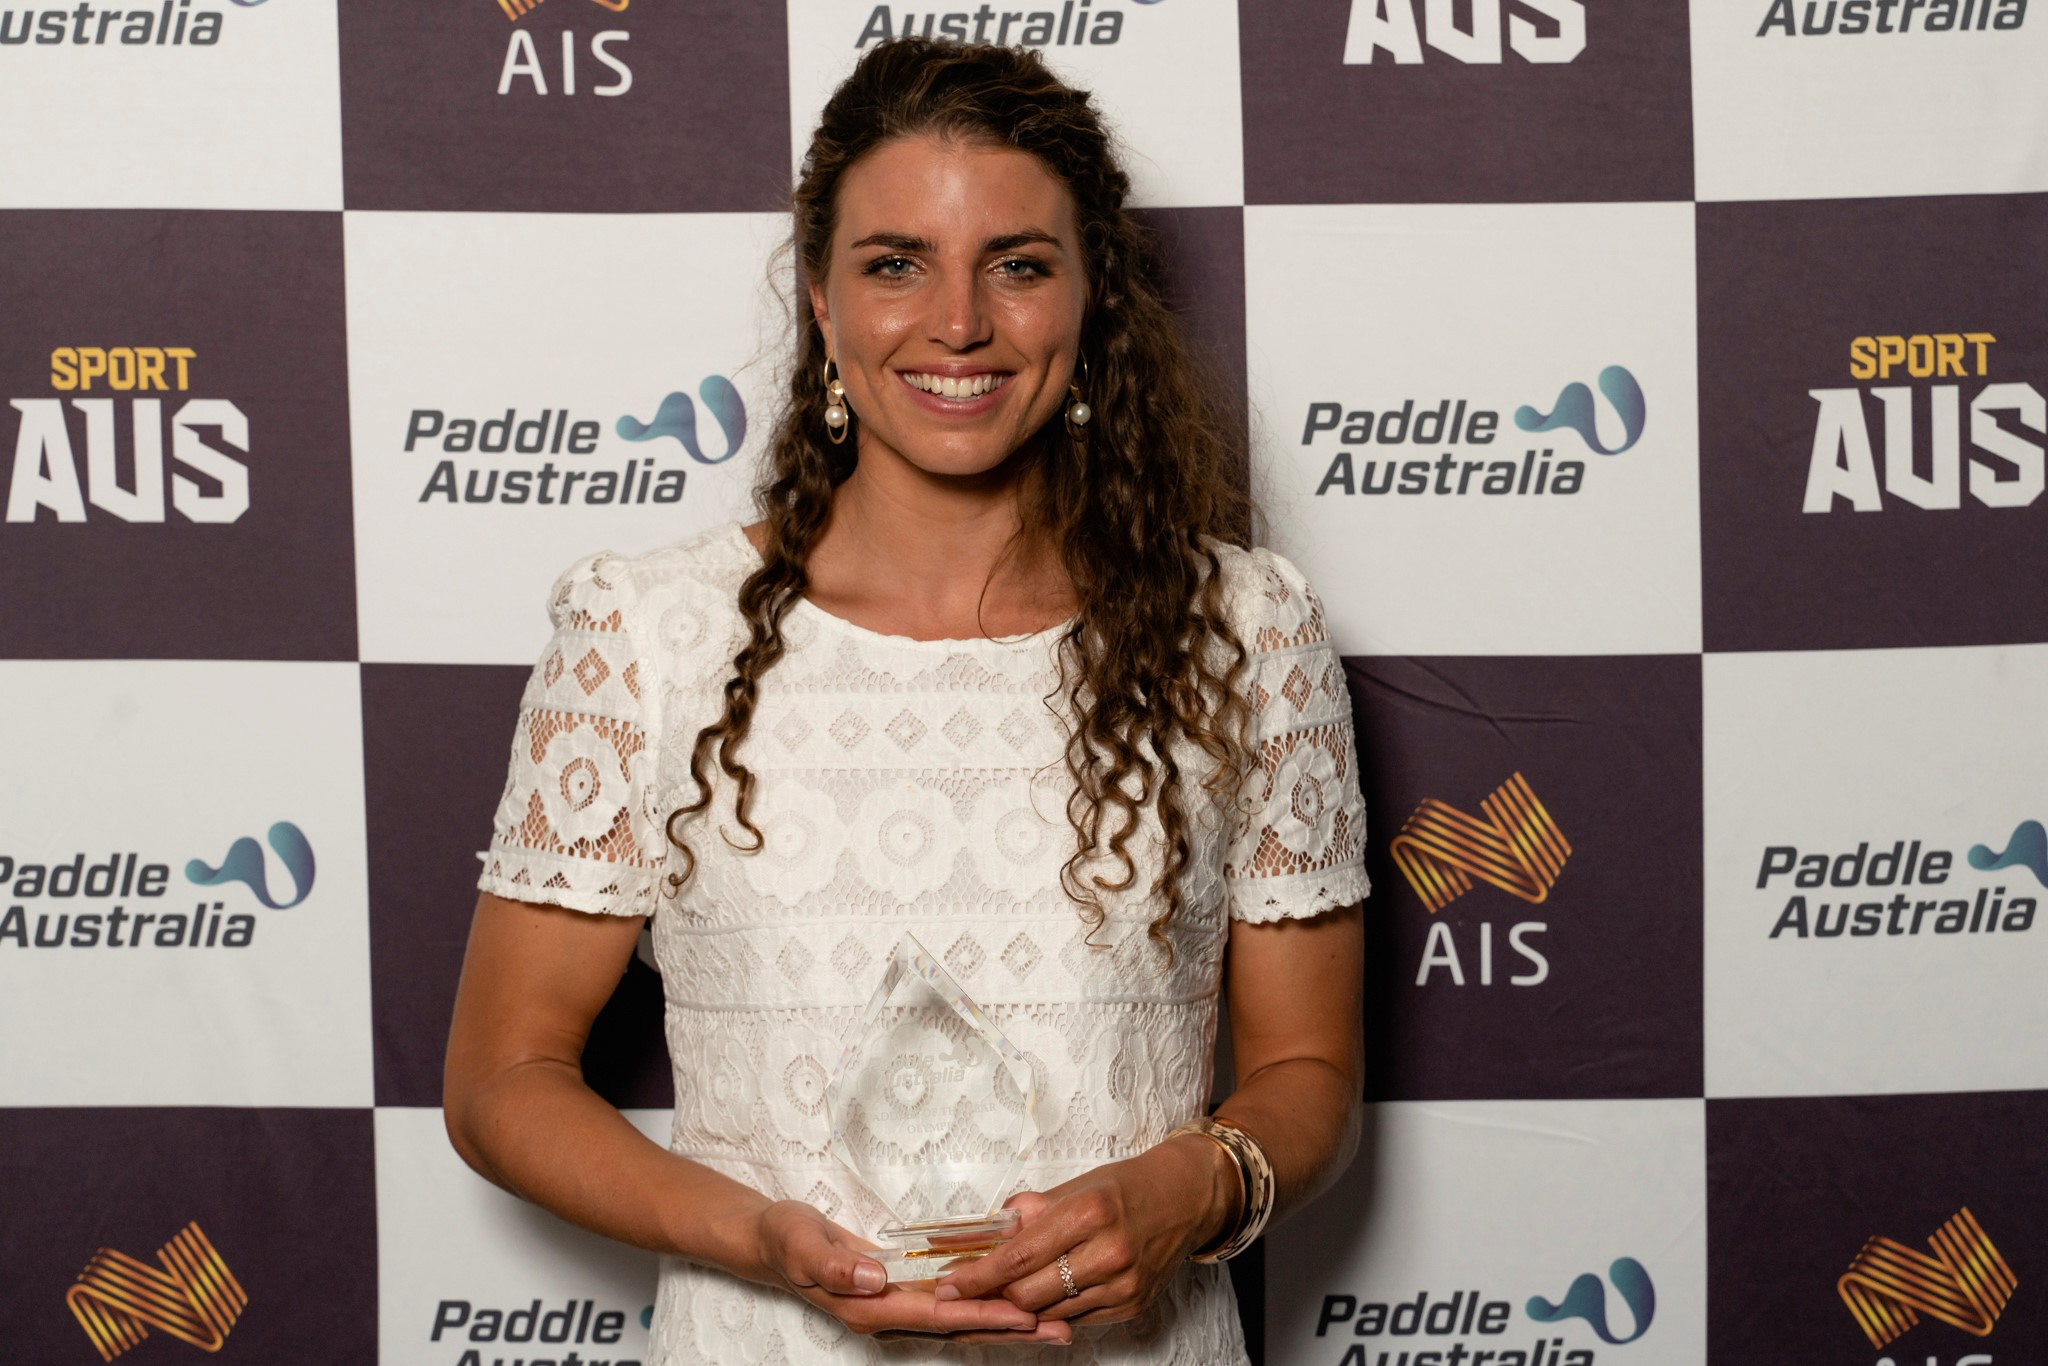 Jessica Fox was crowned as the 2019 Paddler of the Year by Paddle Australia ©Paddle Australia  